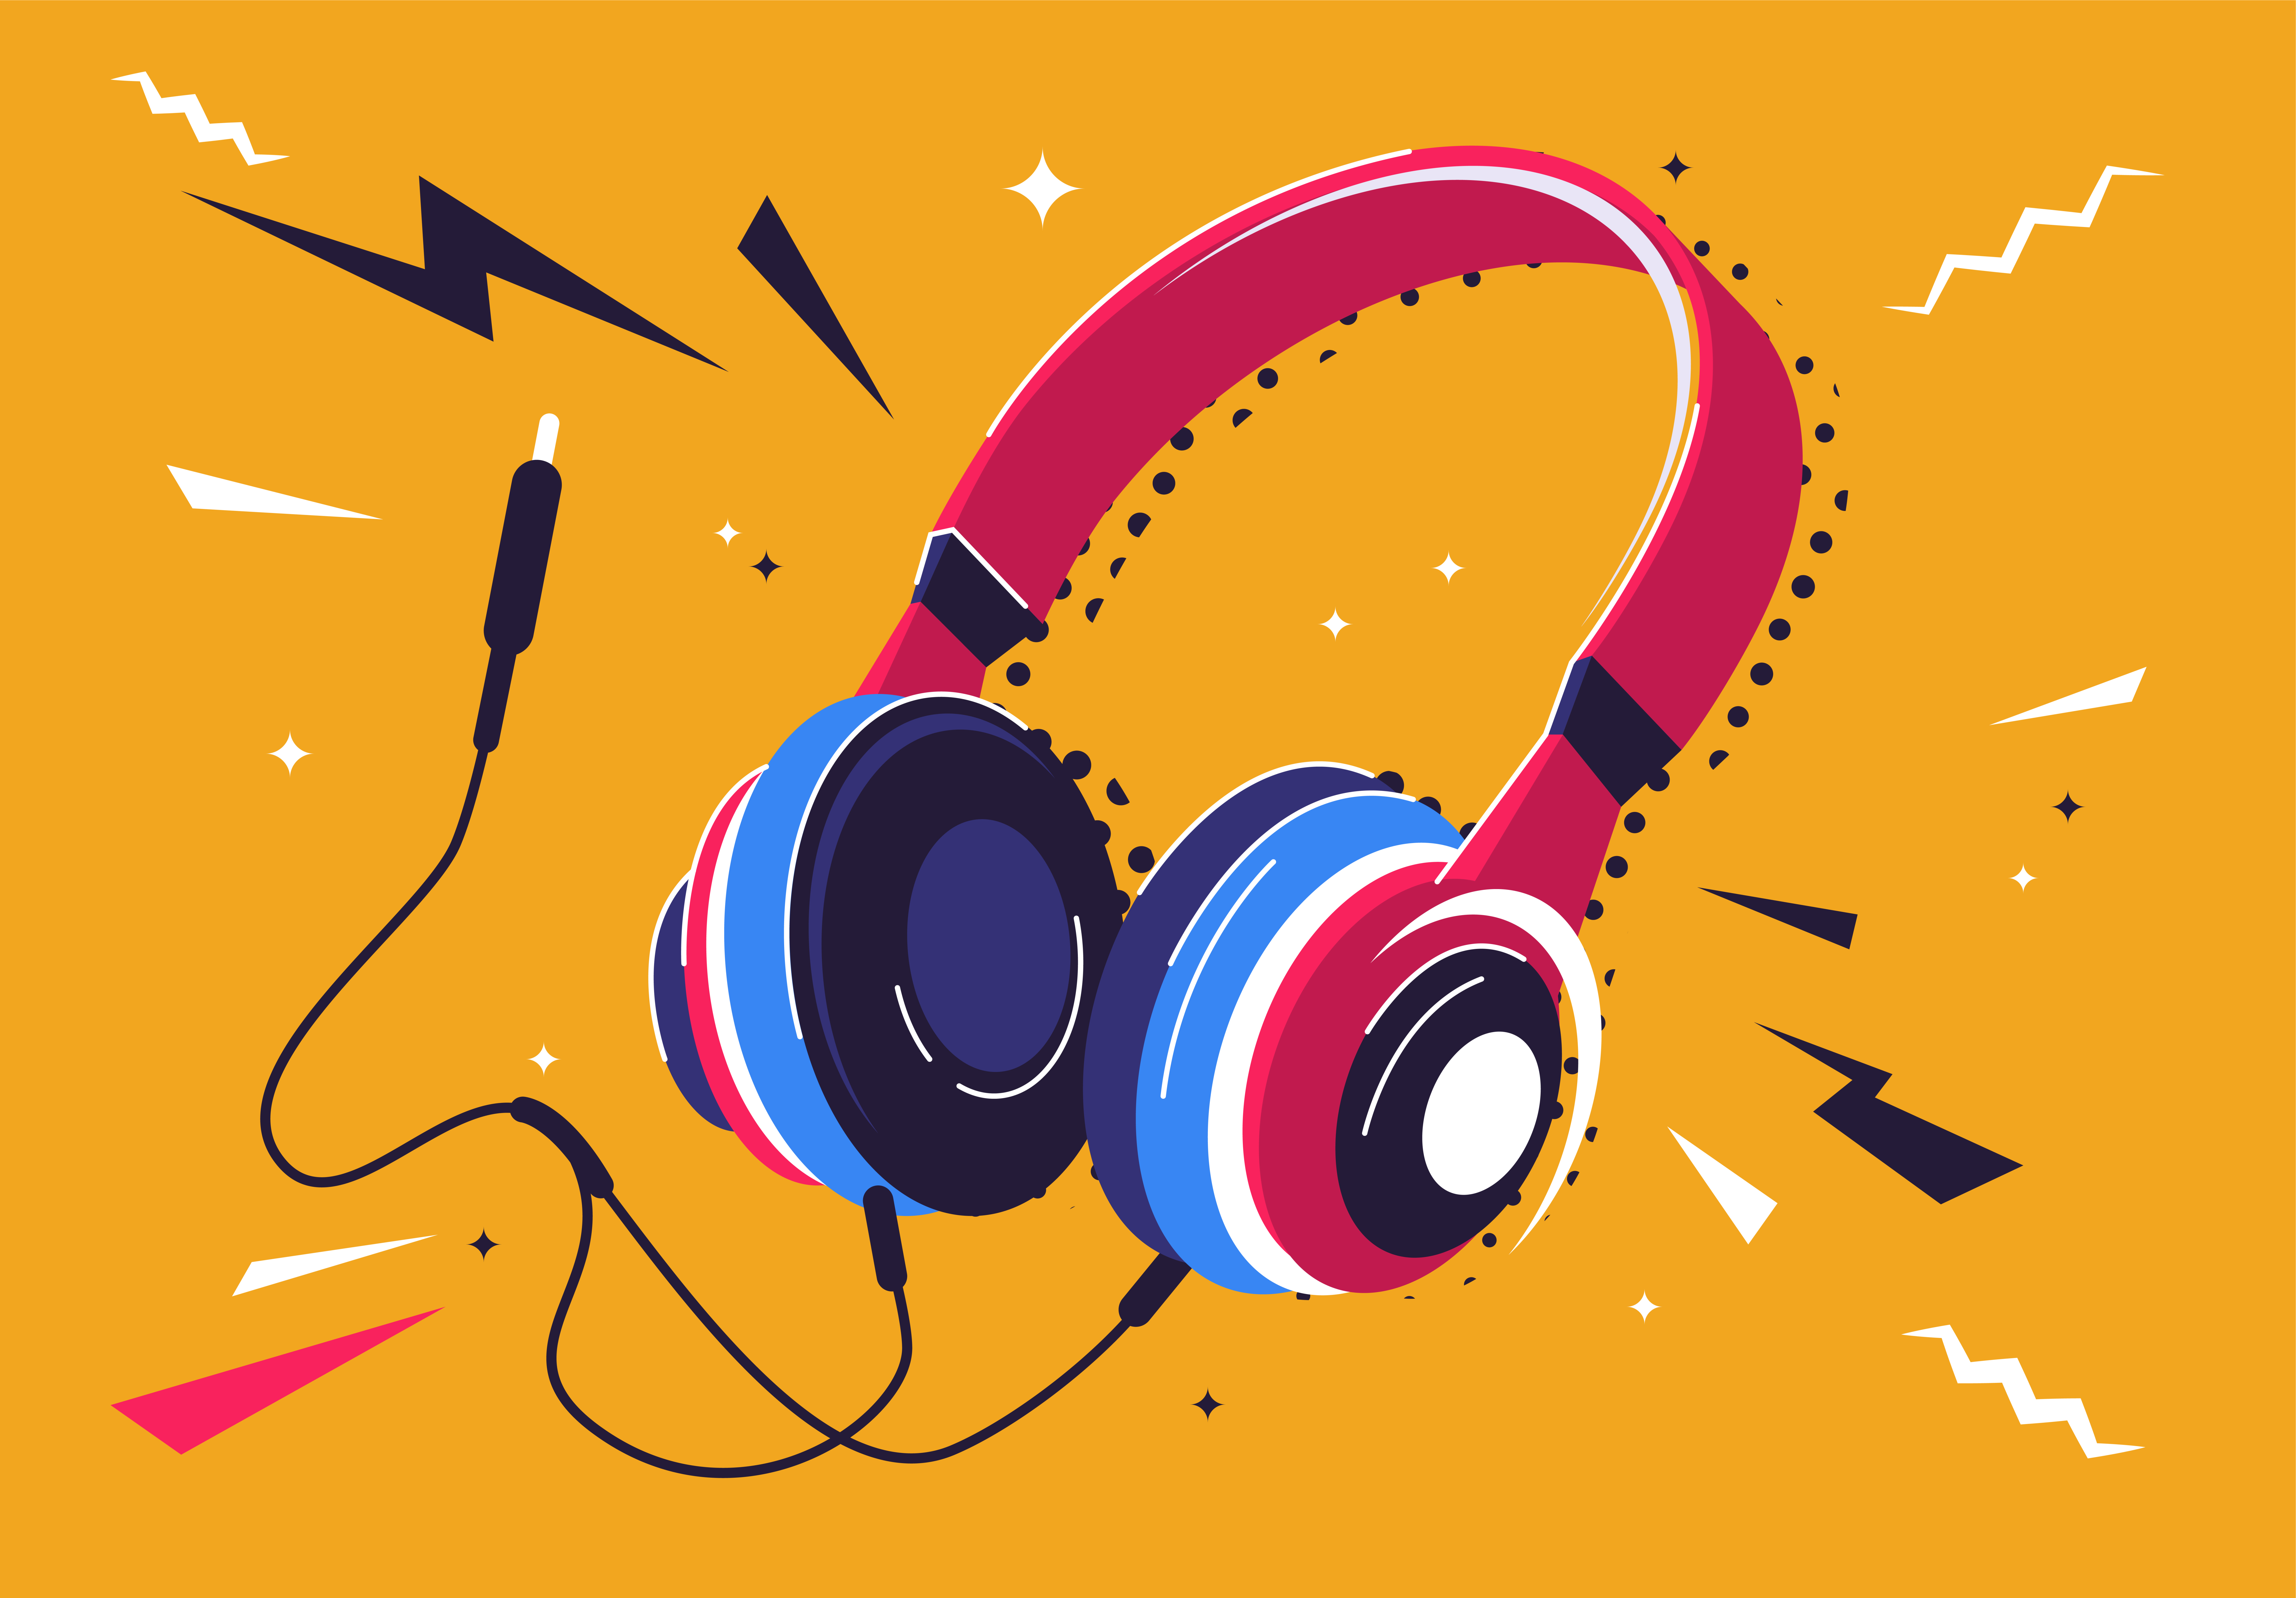 An illustration of a pair of colorful headphones